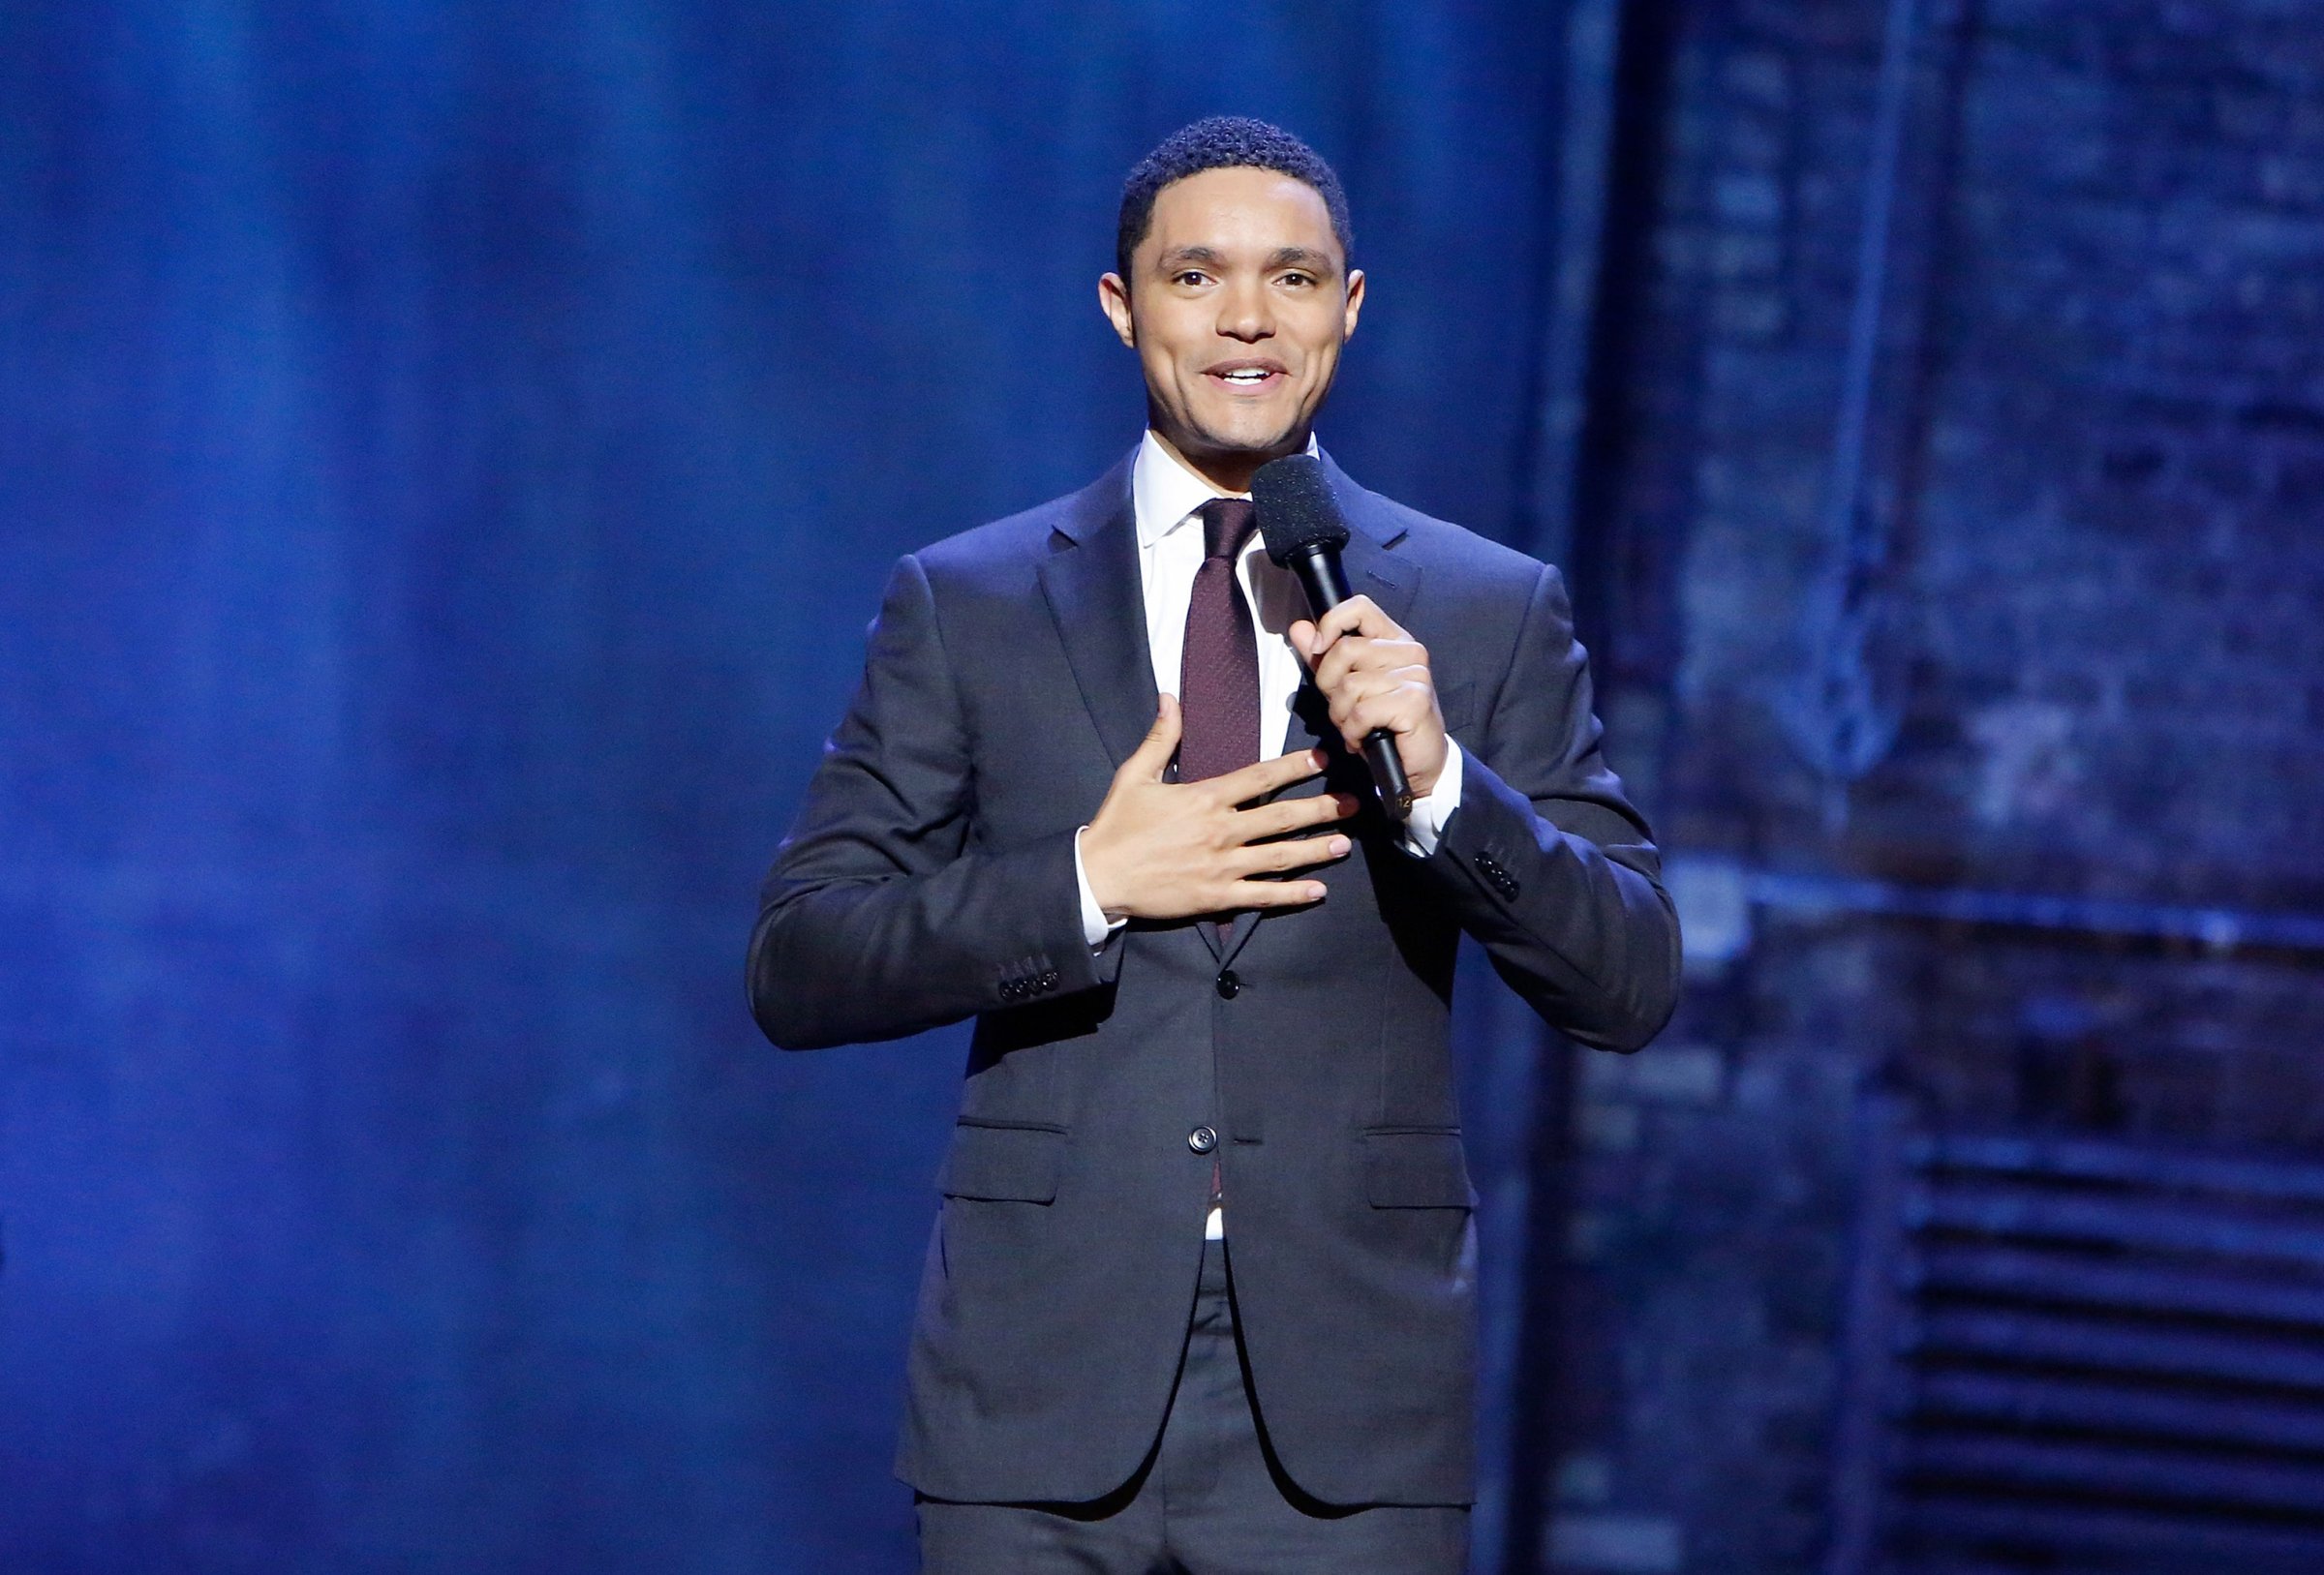 Trevor Noah on The Daily Show Undesked Chicago 2017: Lets Do This Before It Gets Too Damn Cold on October 16, 2017 in Chicago, Illinois.